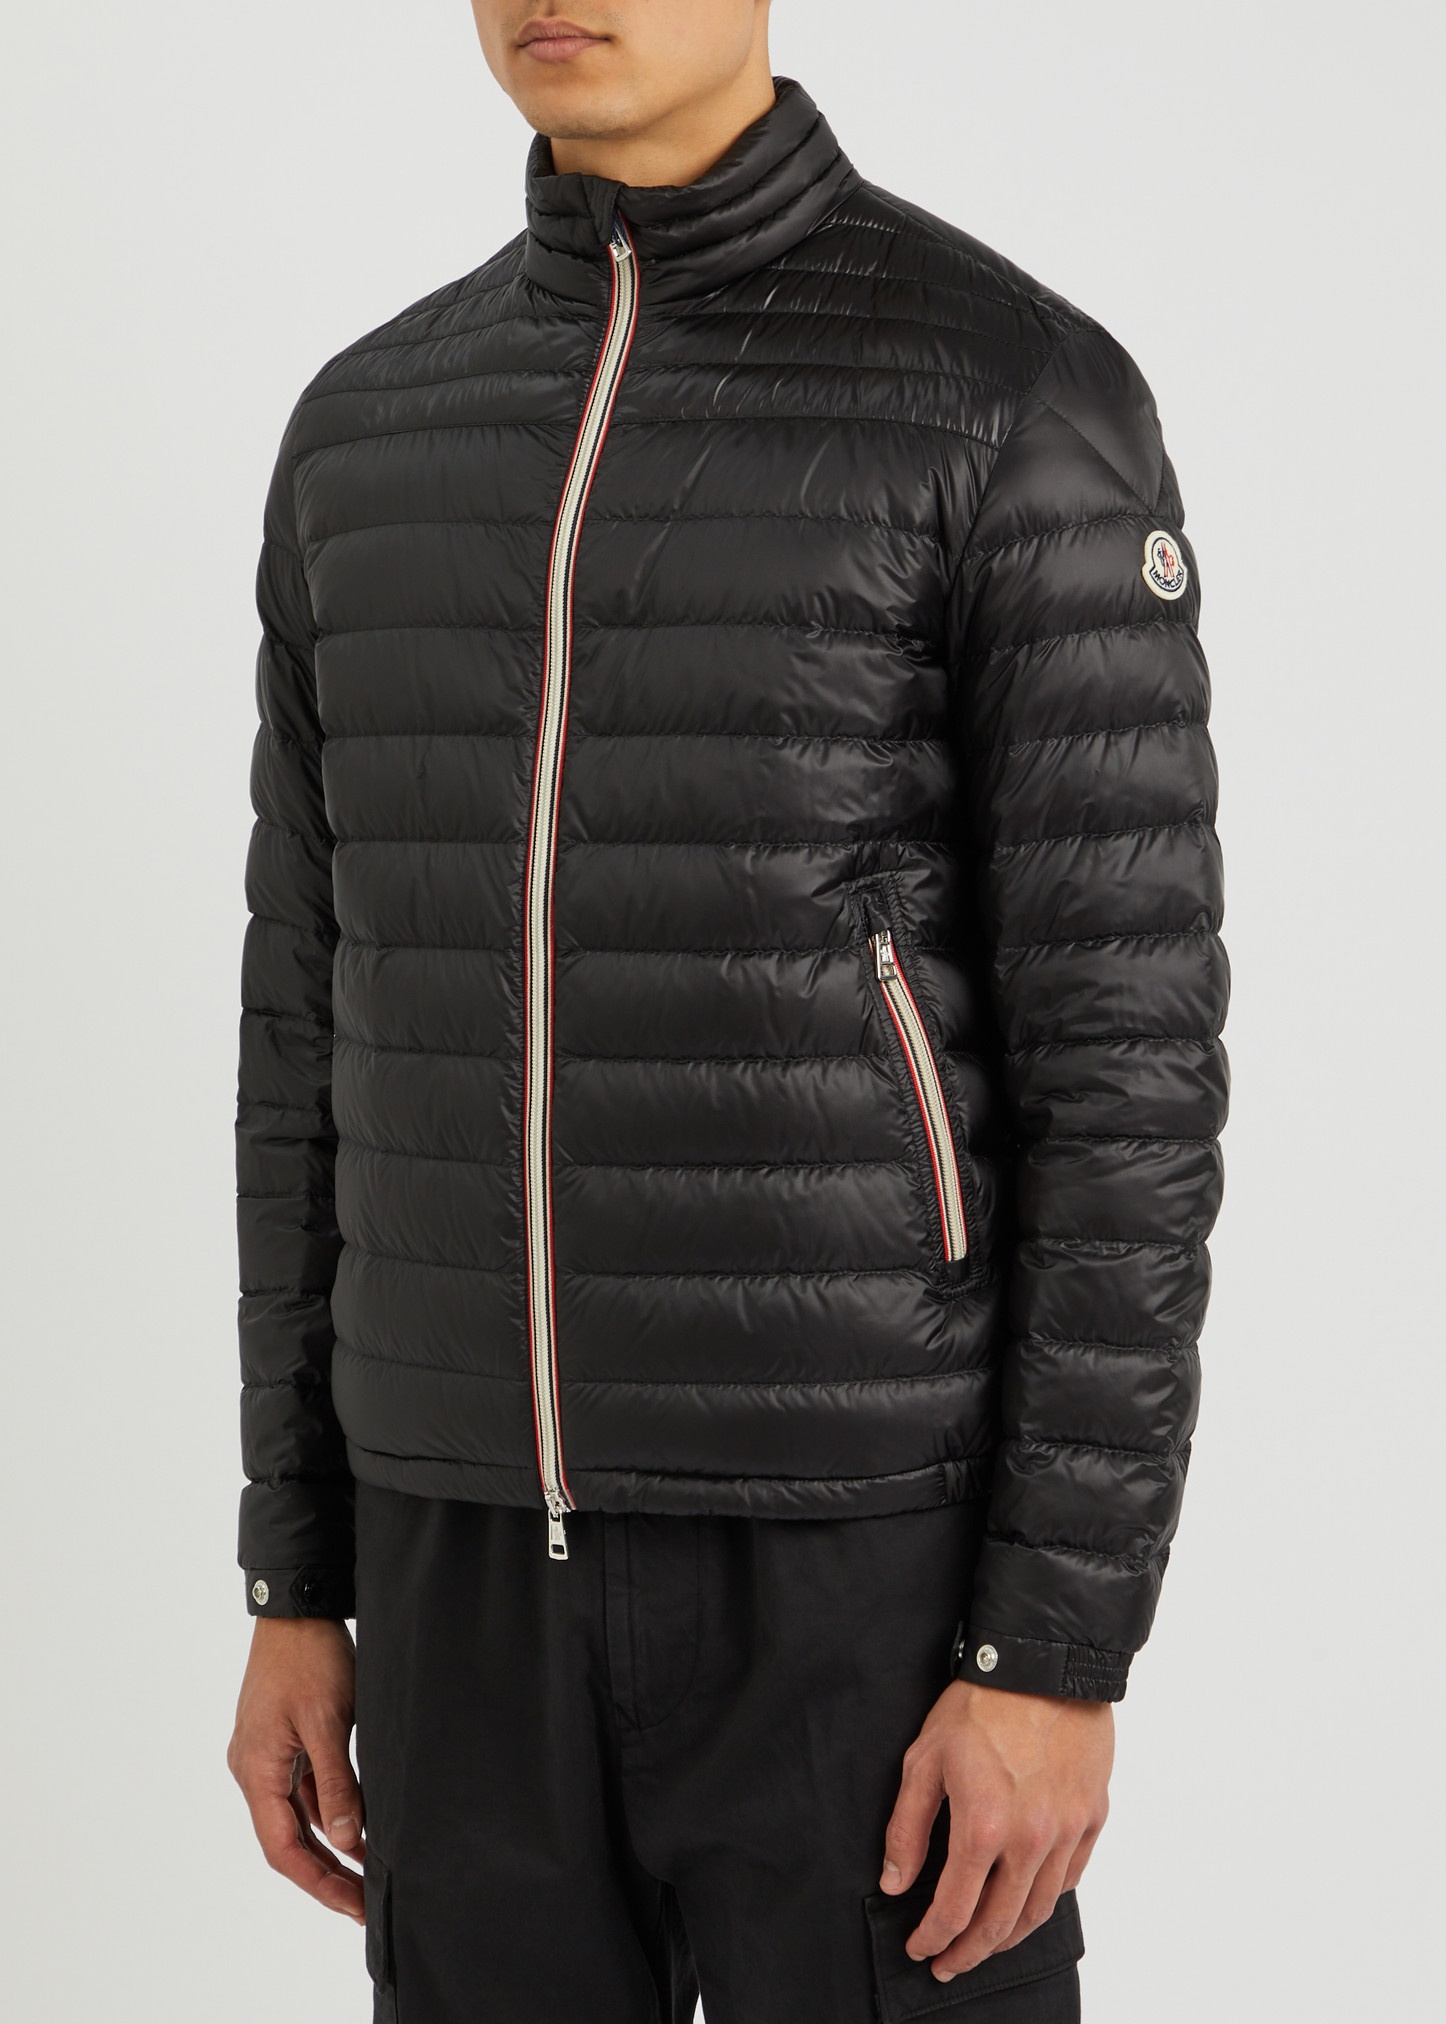 Daniel quilted shell jacket - 2